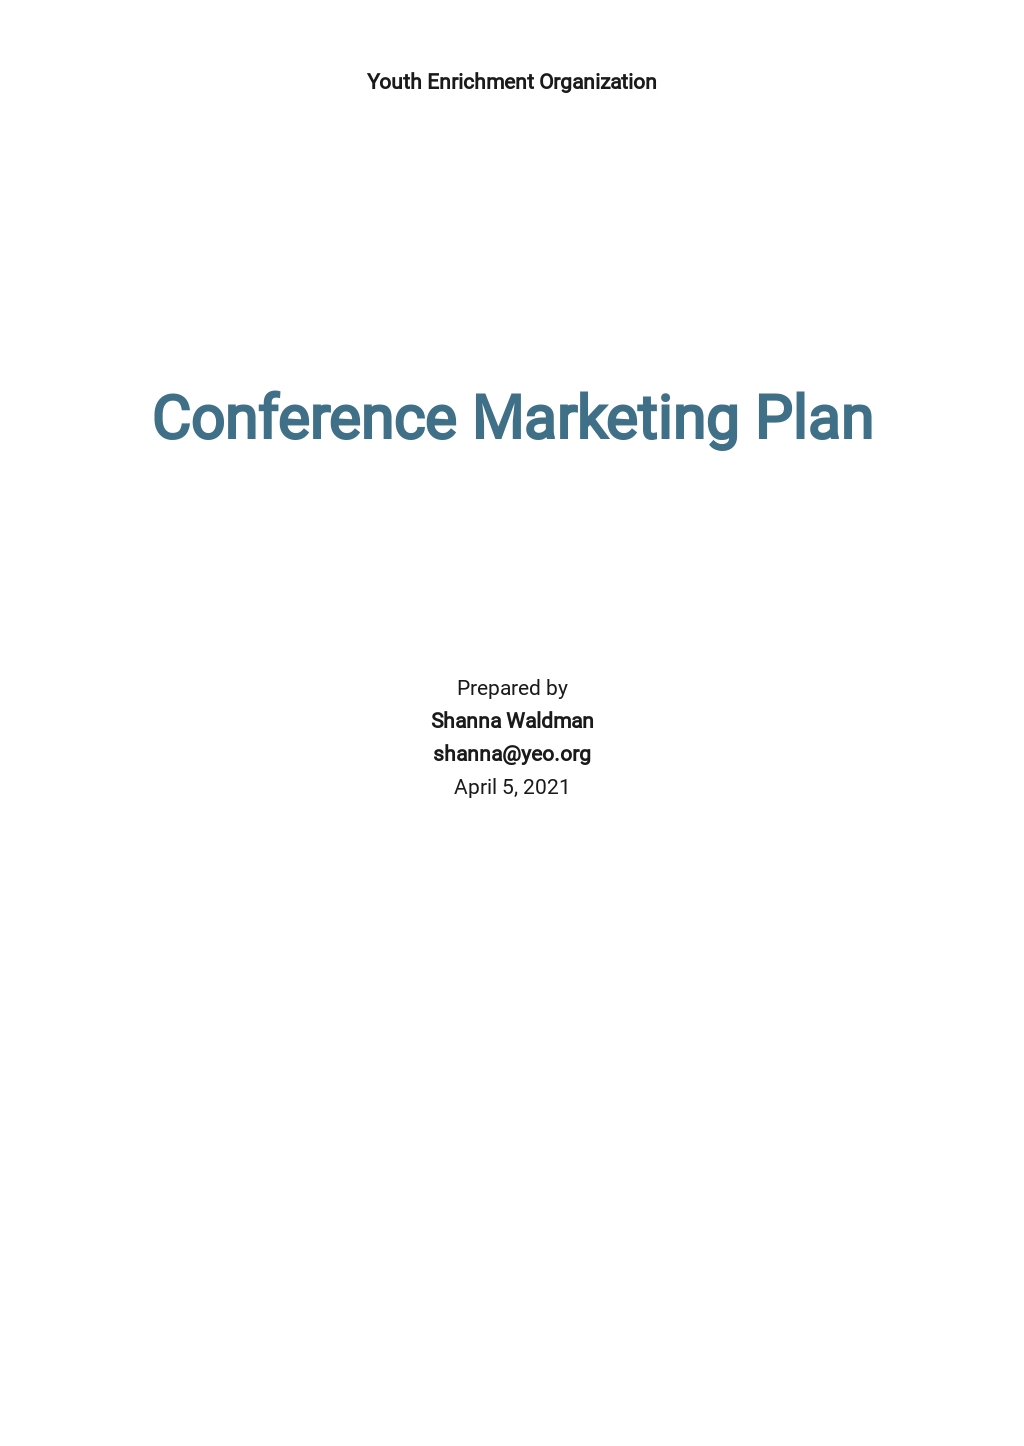 Conference Marketing Plan Template.jpe